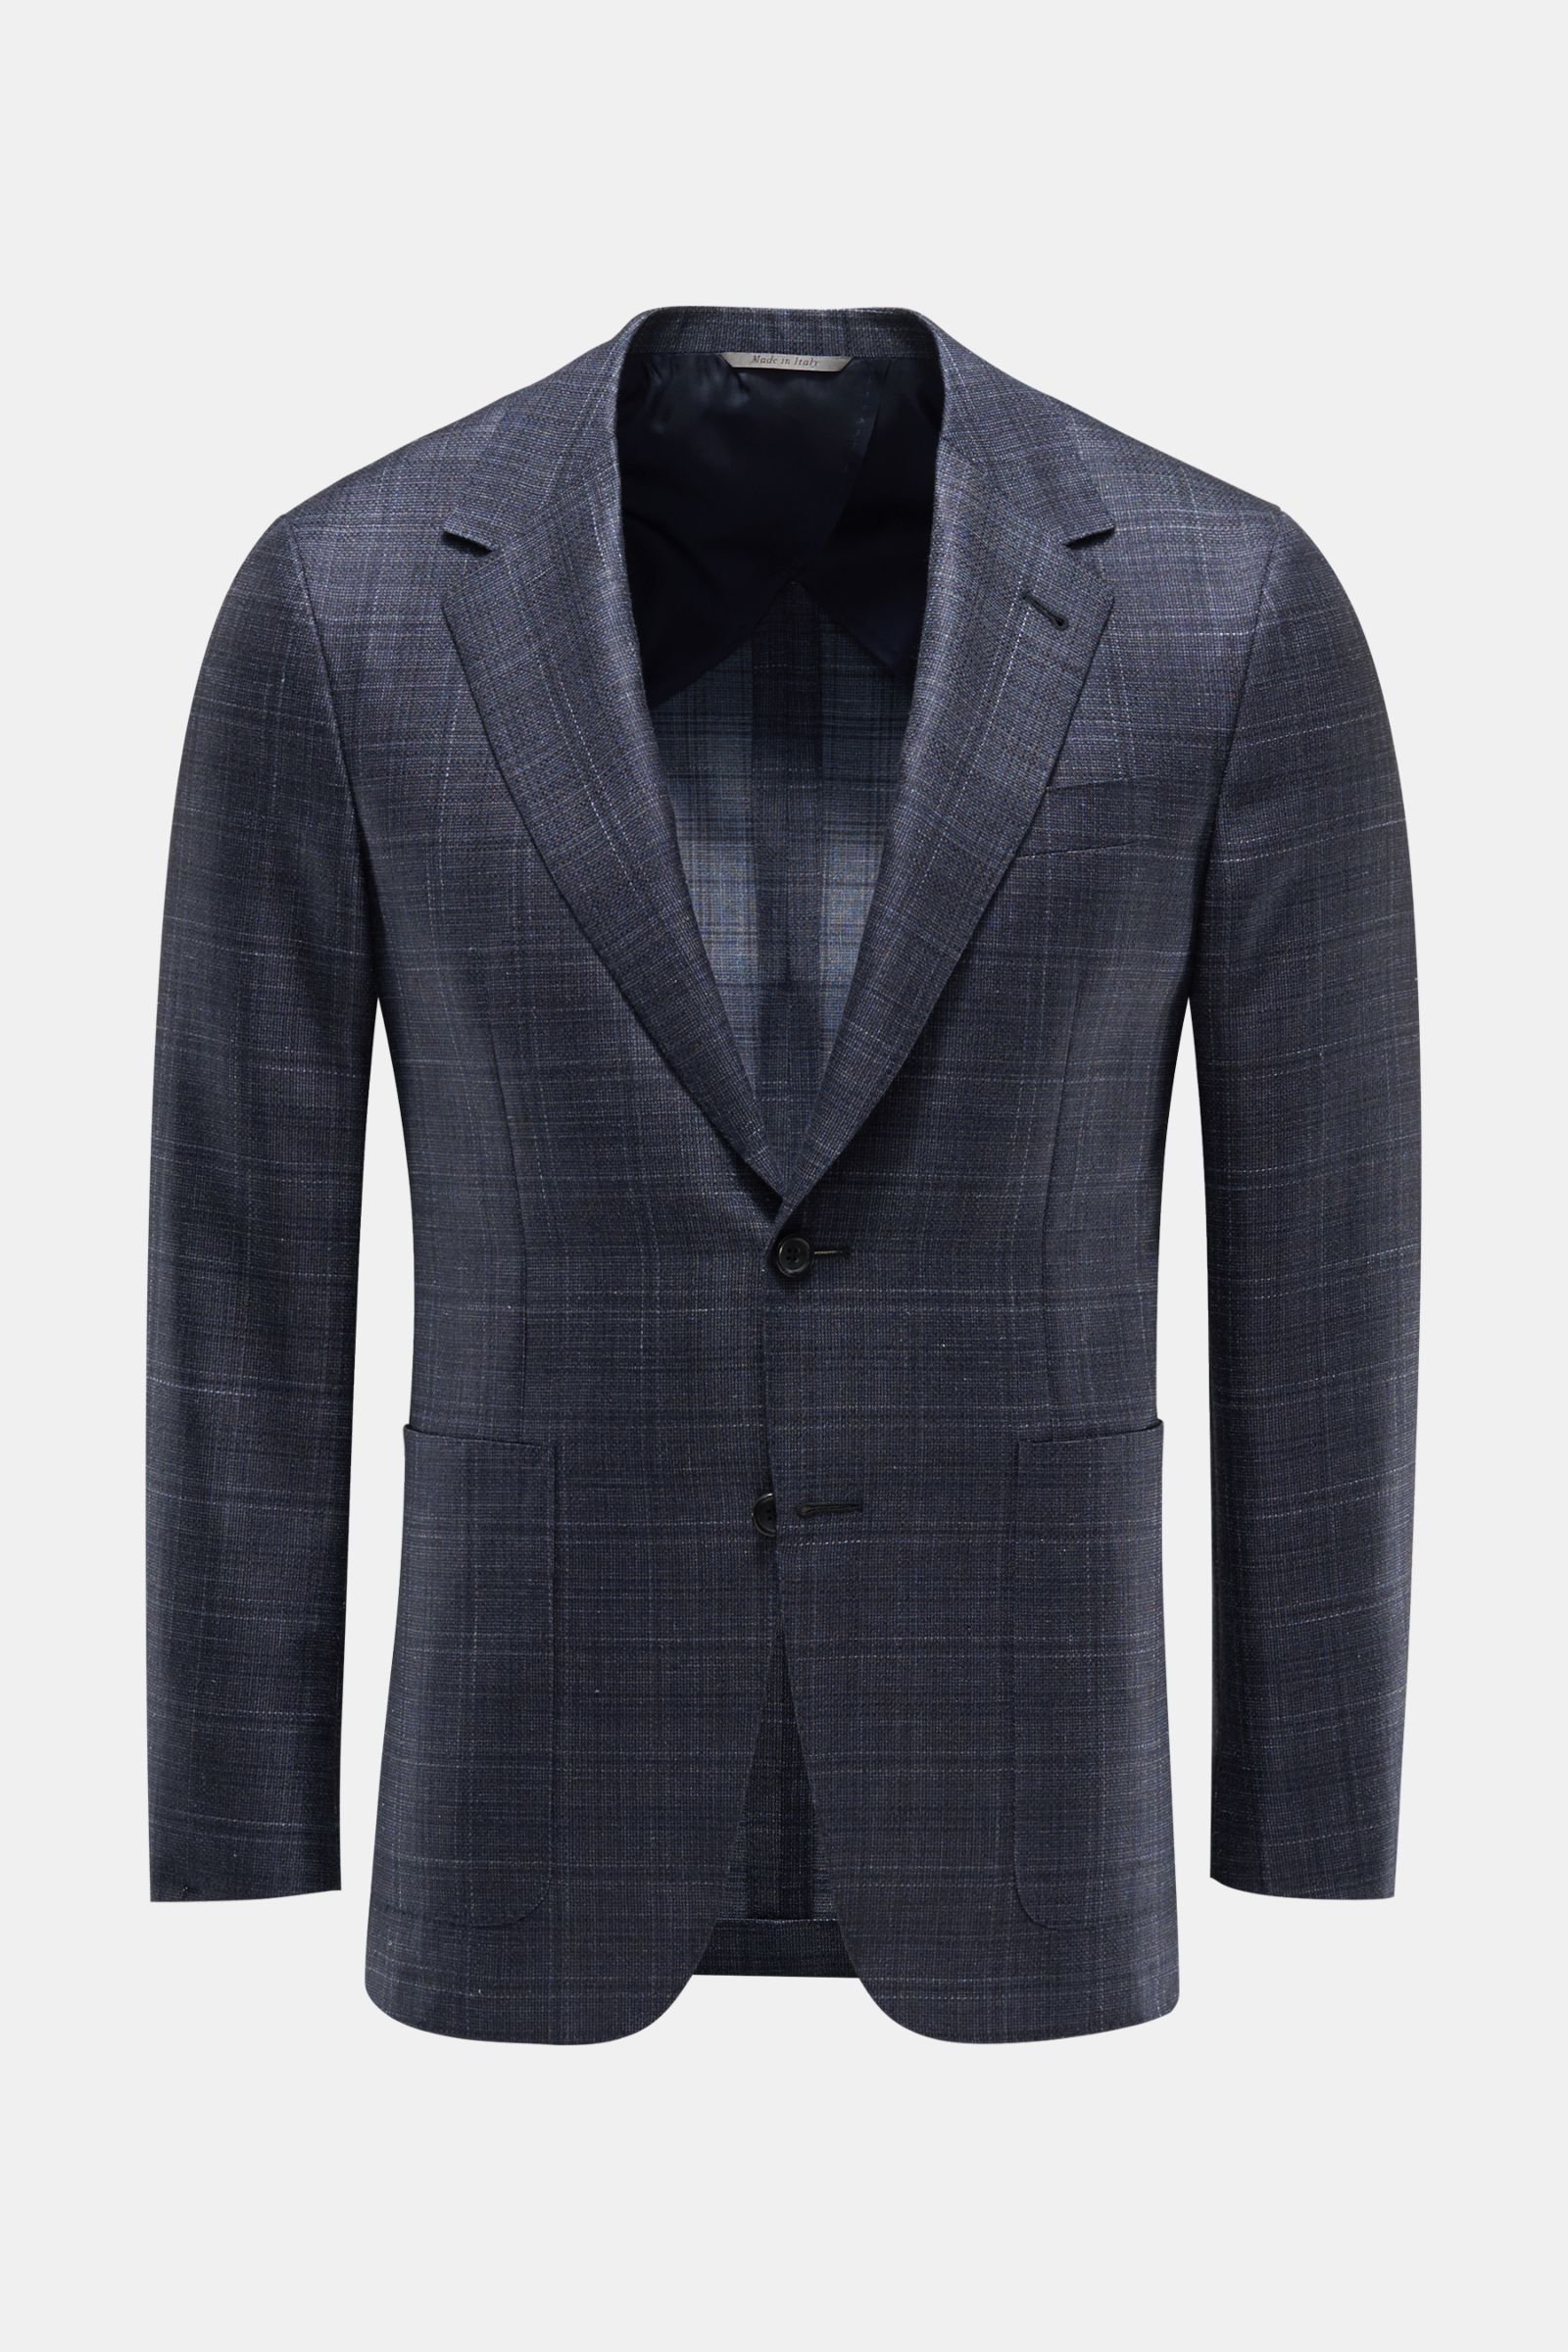 Smart-casual jacket grey-blue checked